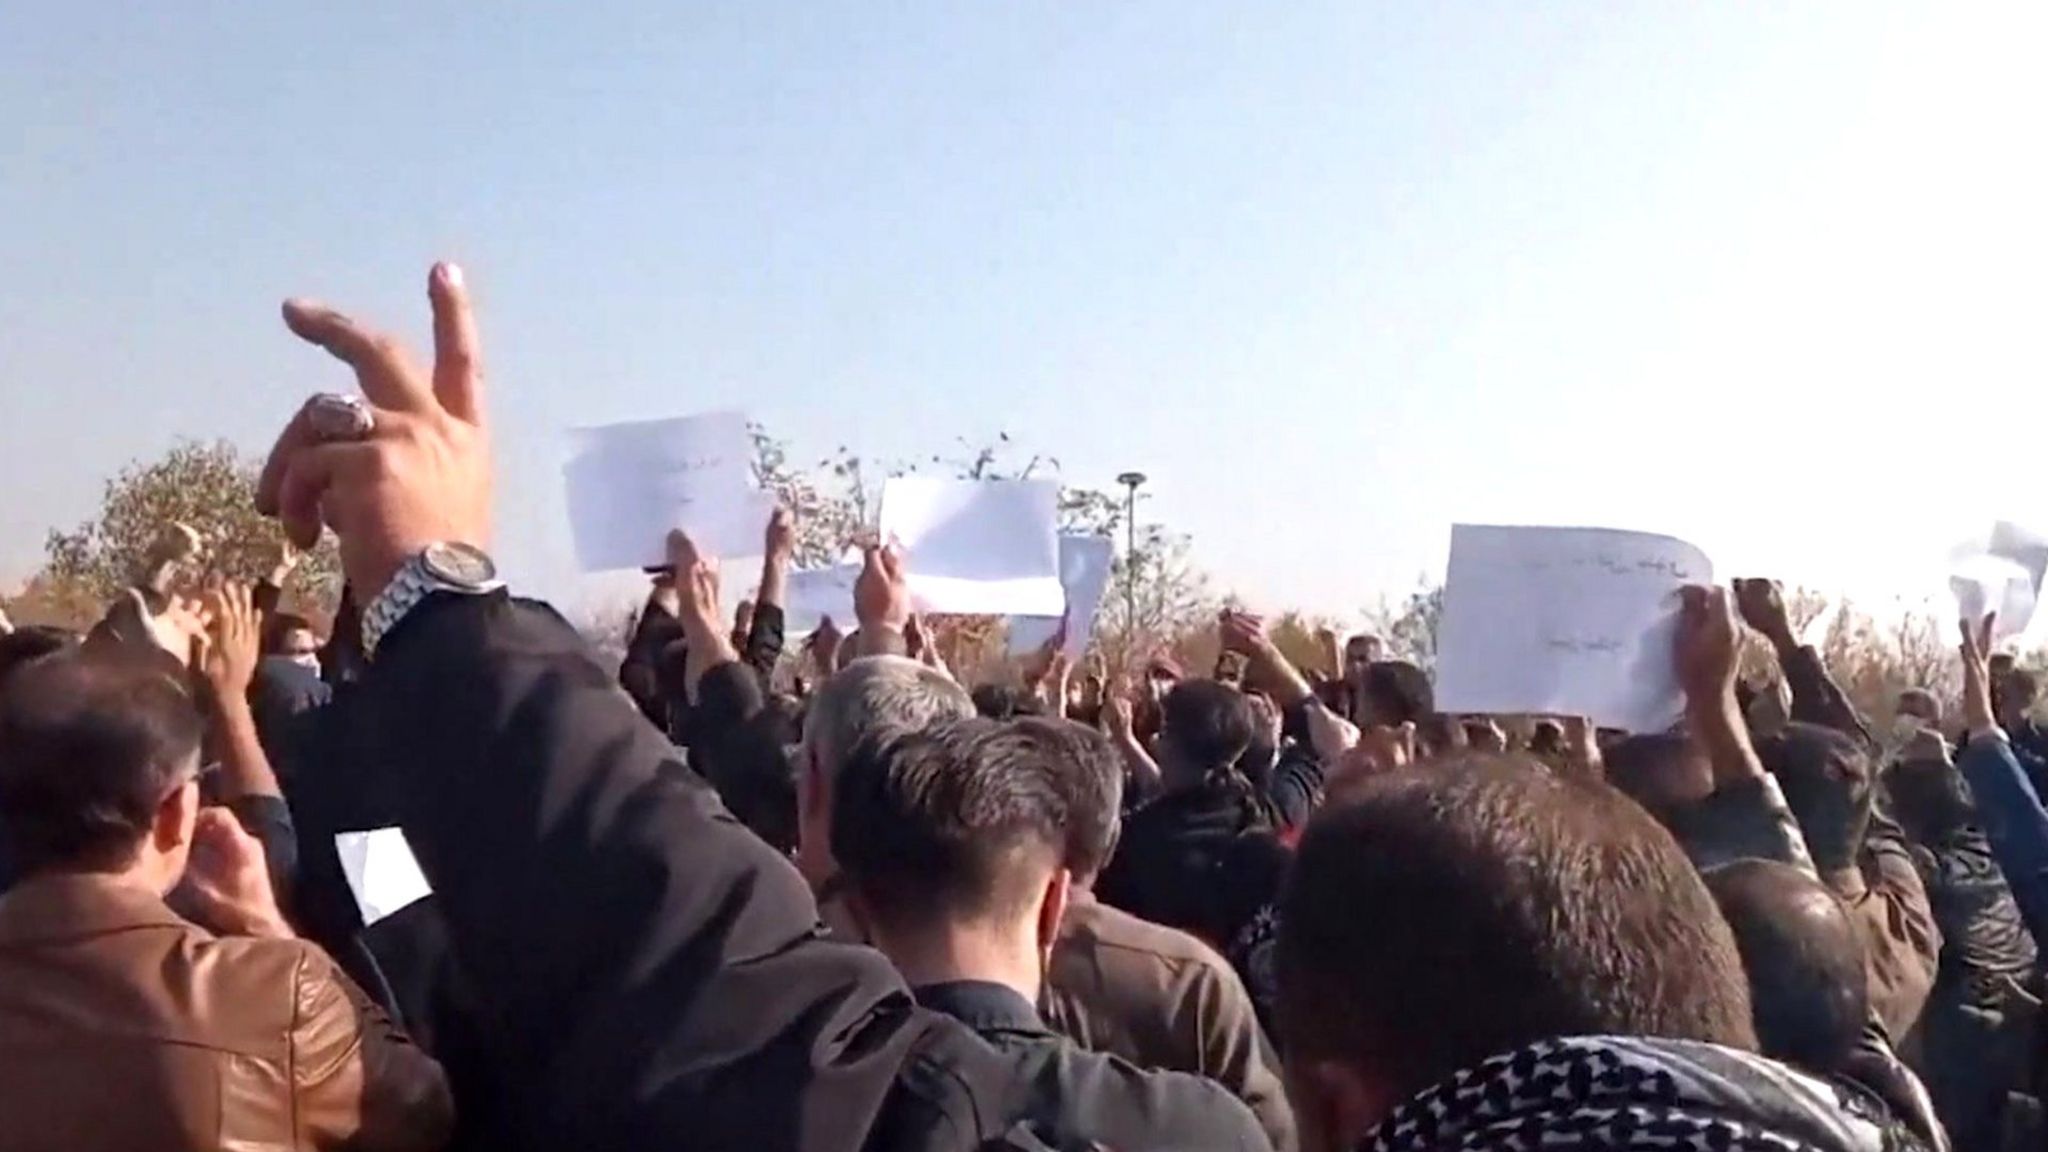 Screengrab of video posted by Kurdish human rights group Hengaw, purportedly showing a crowd protesting at the cemetery in Saqqez, Iran, where Mahsa Amini is buried (26 October 2022)